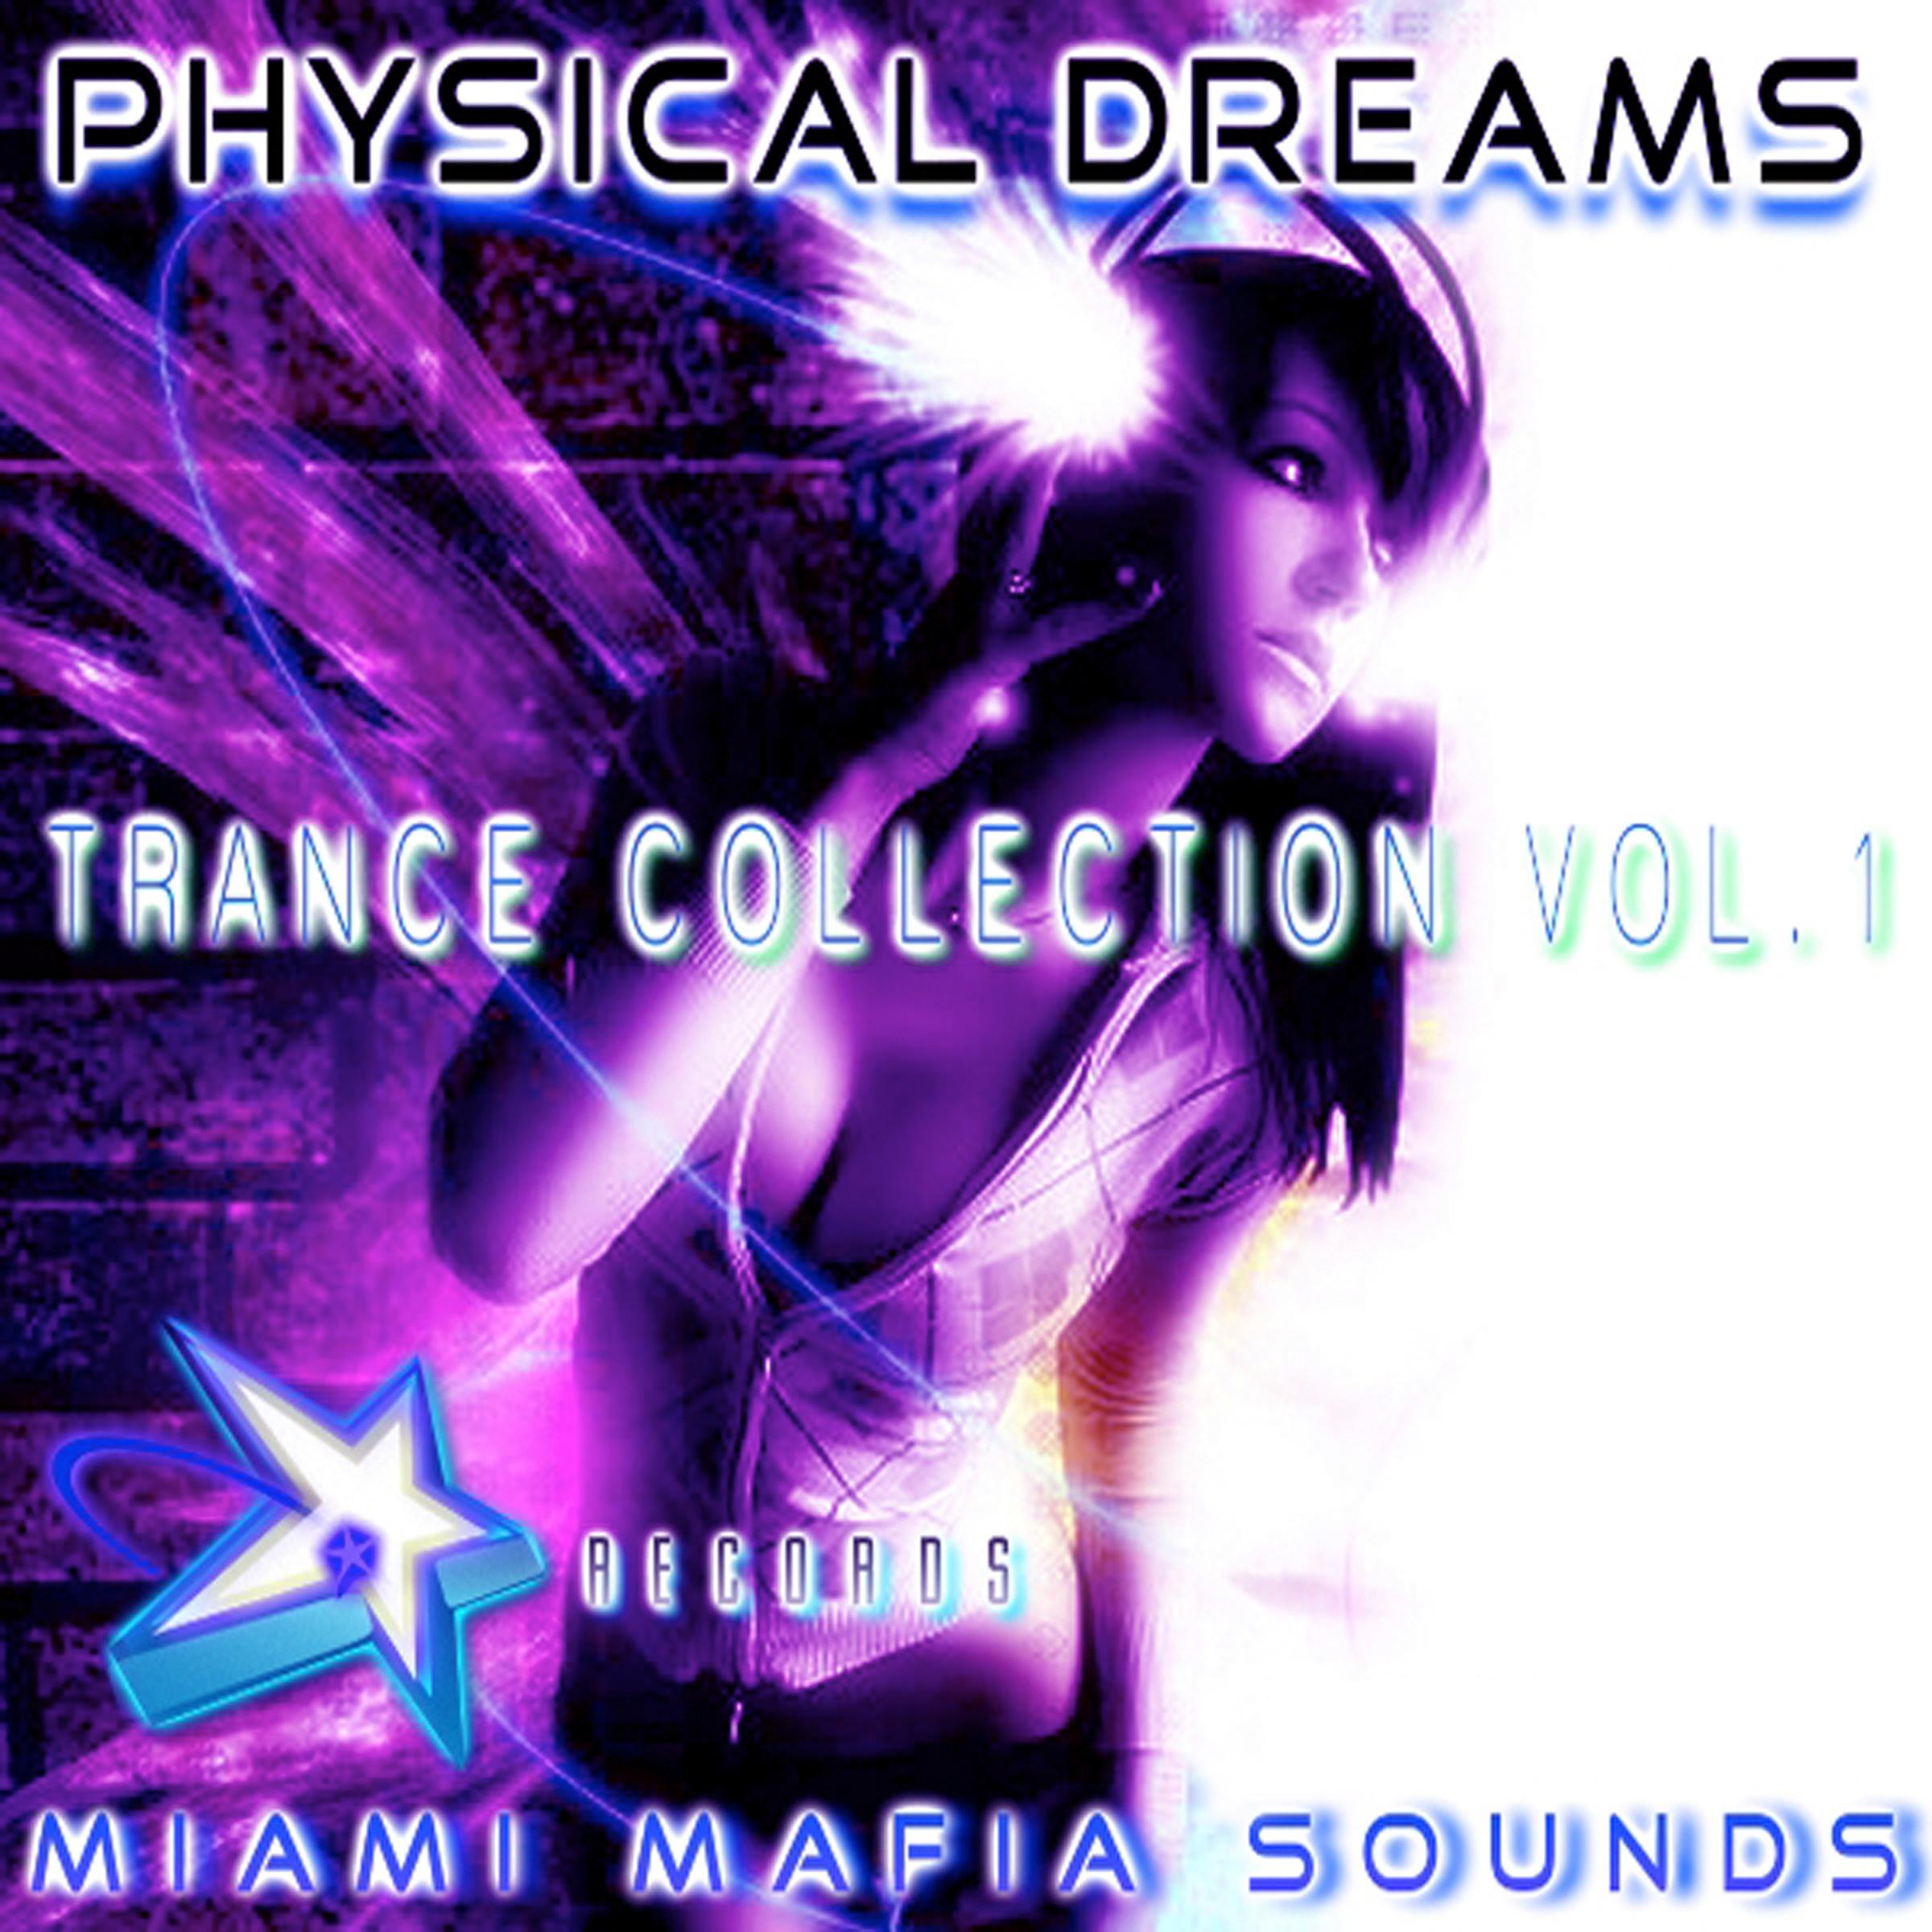 Physical Dreams Trance Collection, Vol. 1